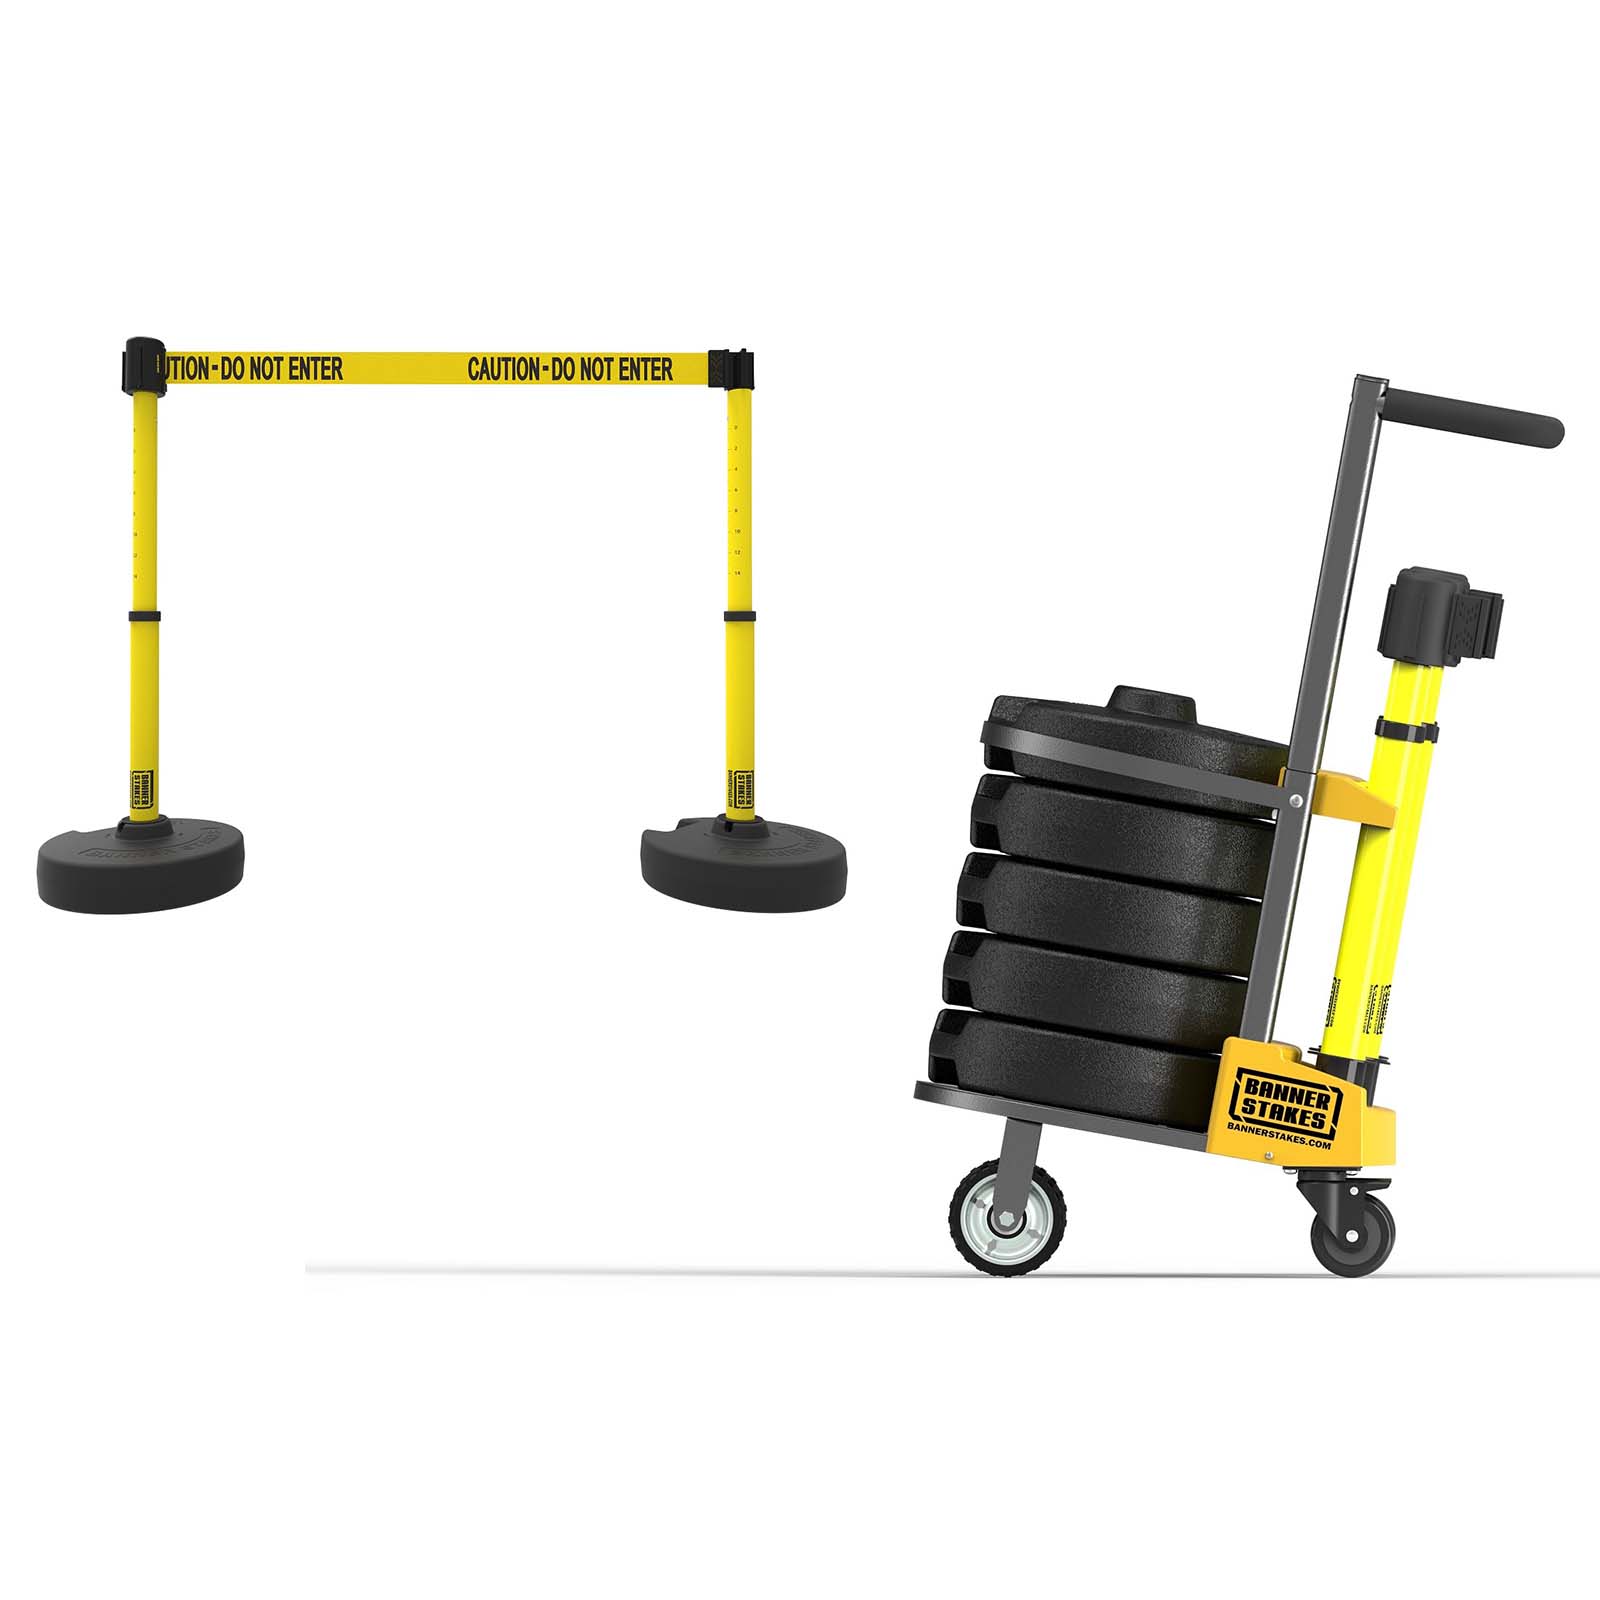 Banner Stakes PL4078 PLUS Cart Package, Yellow "Caution-Do Not Enter" Banner